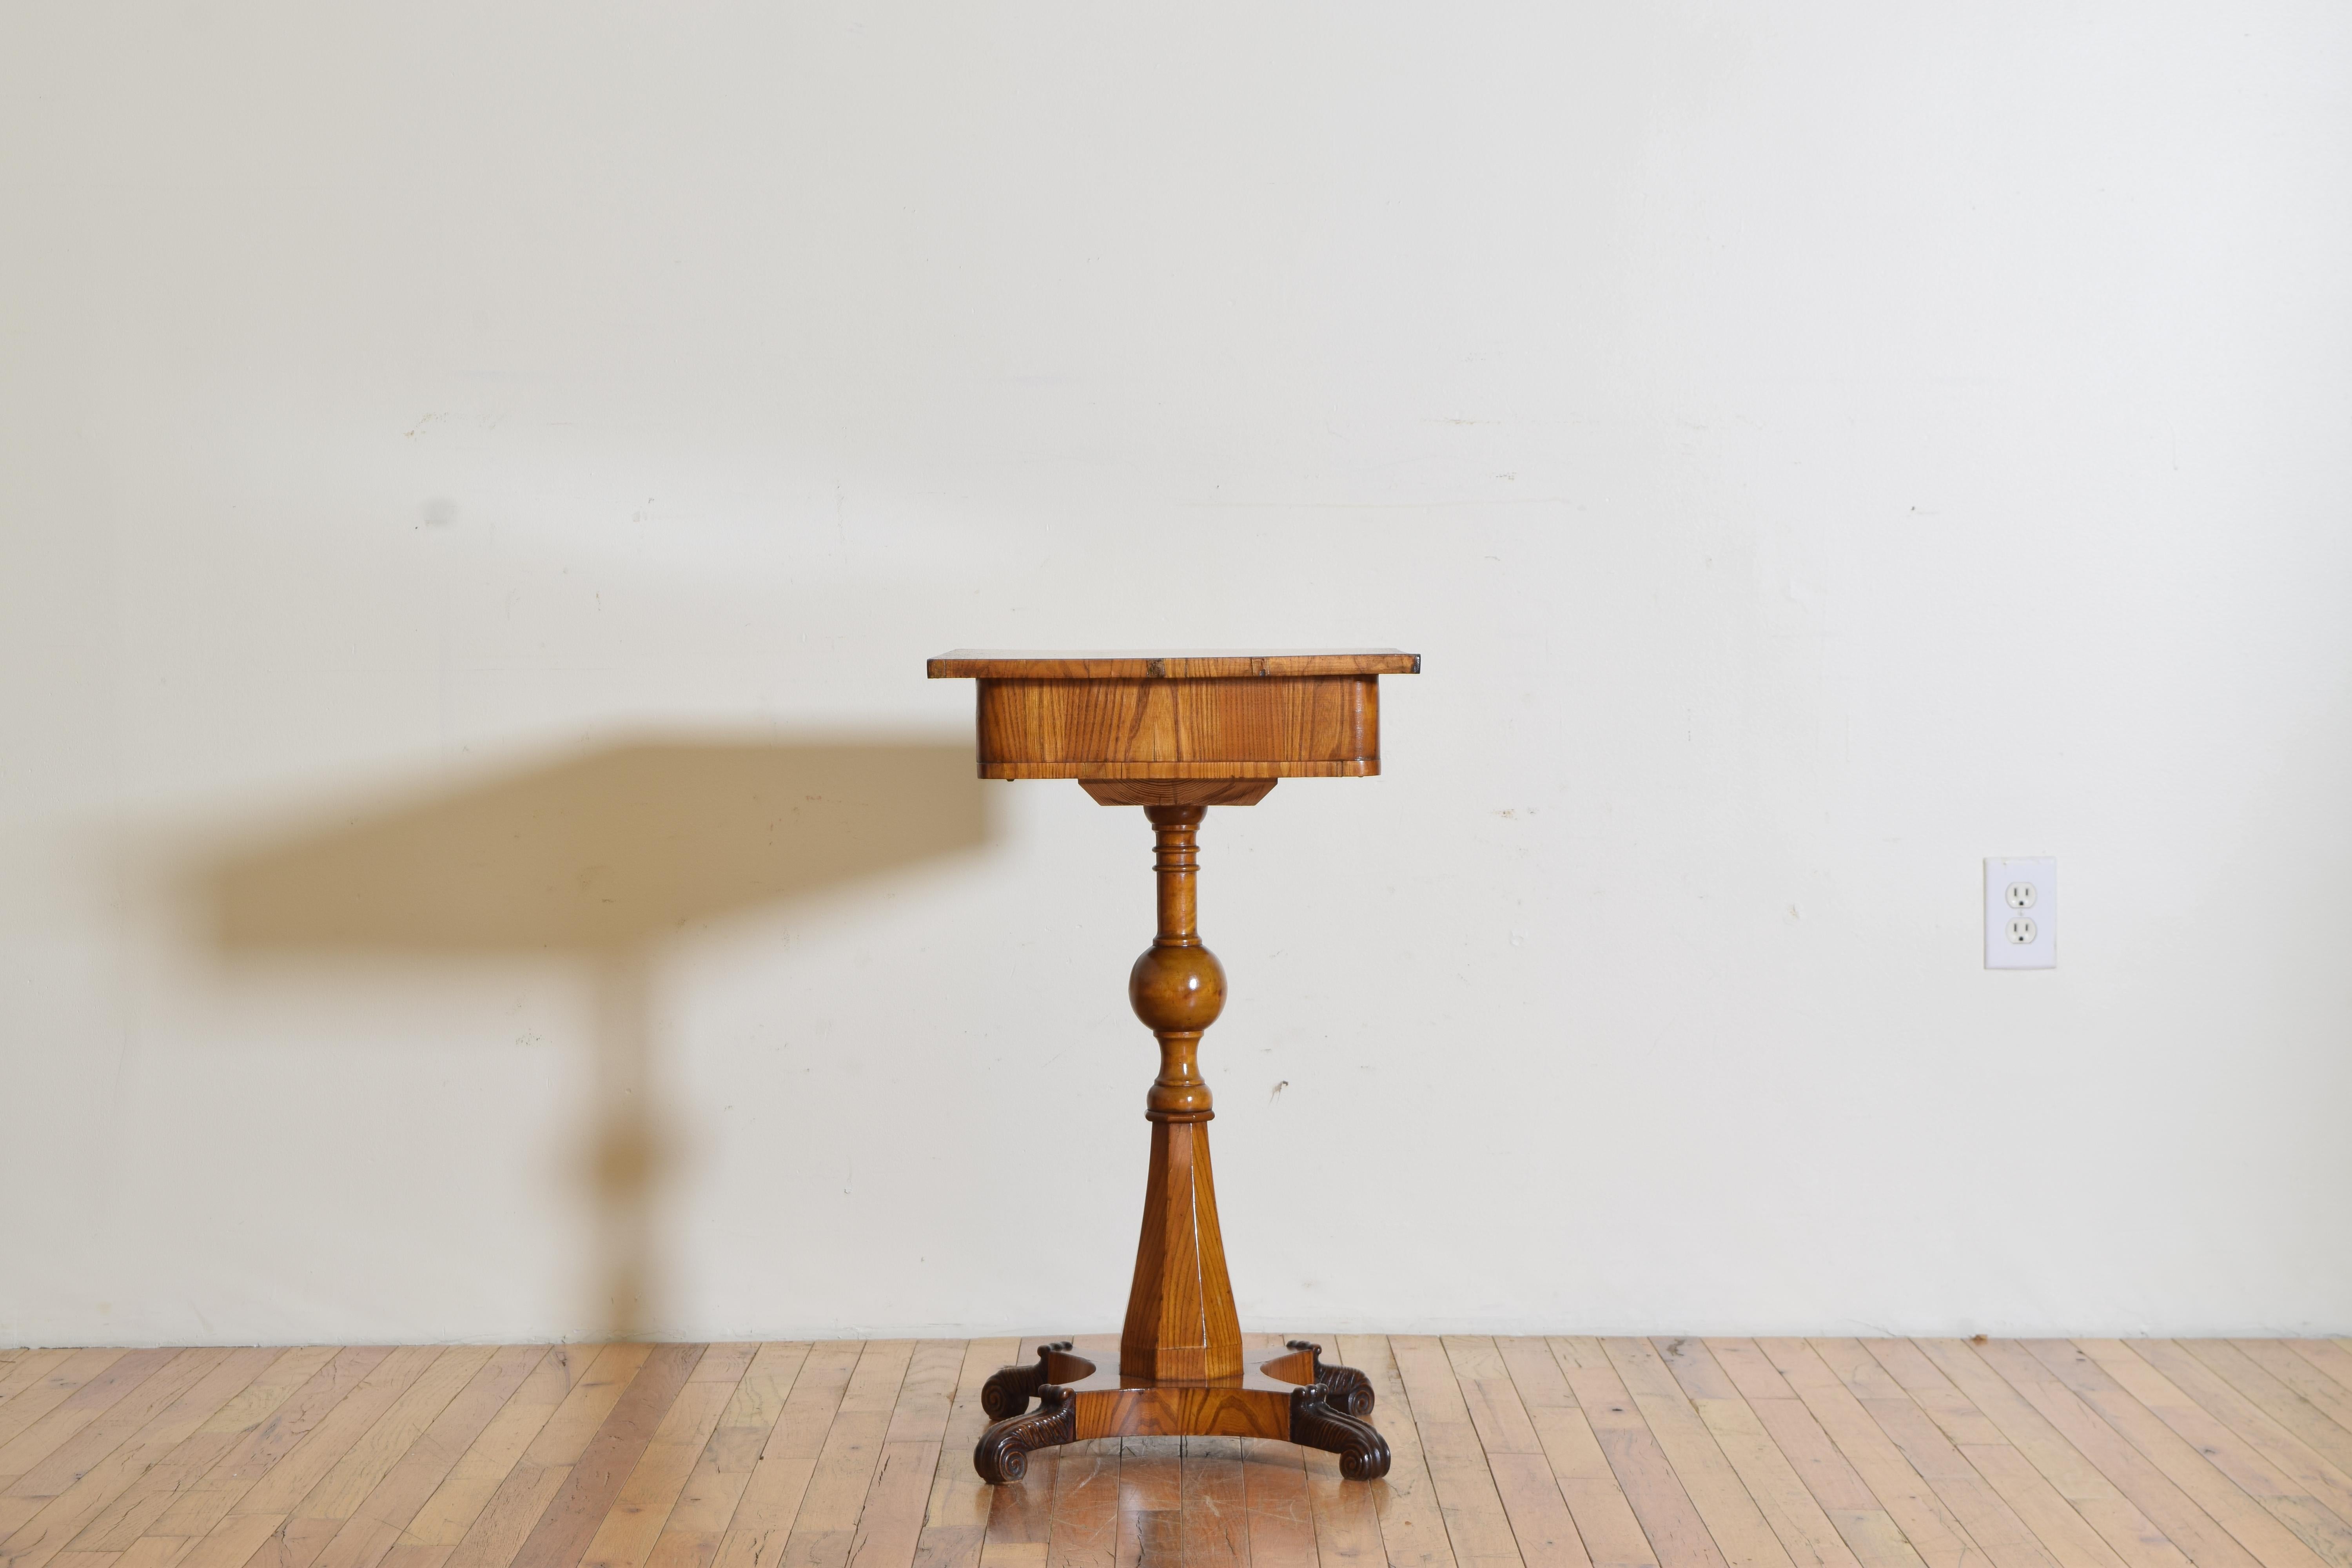 Mid-19th Century Swedish Neoclassical Revival Chestnut 1-Drawer Work Table, 3rdq 19th Cen